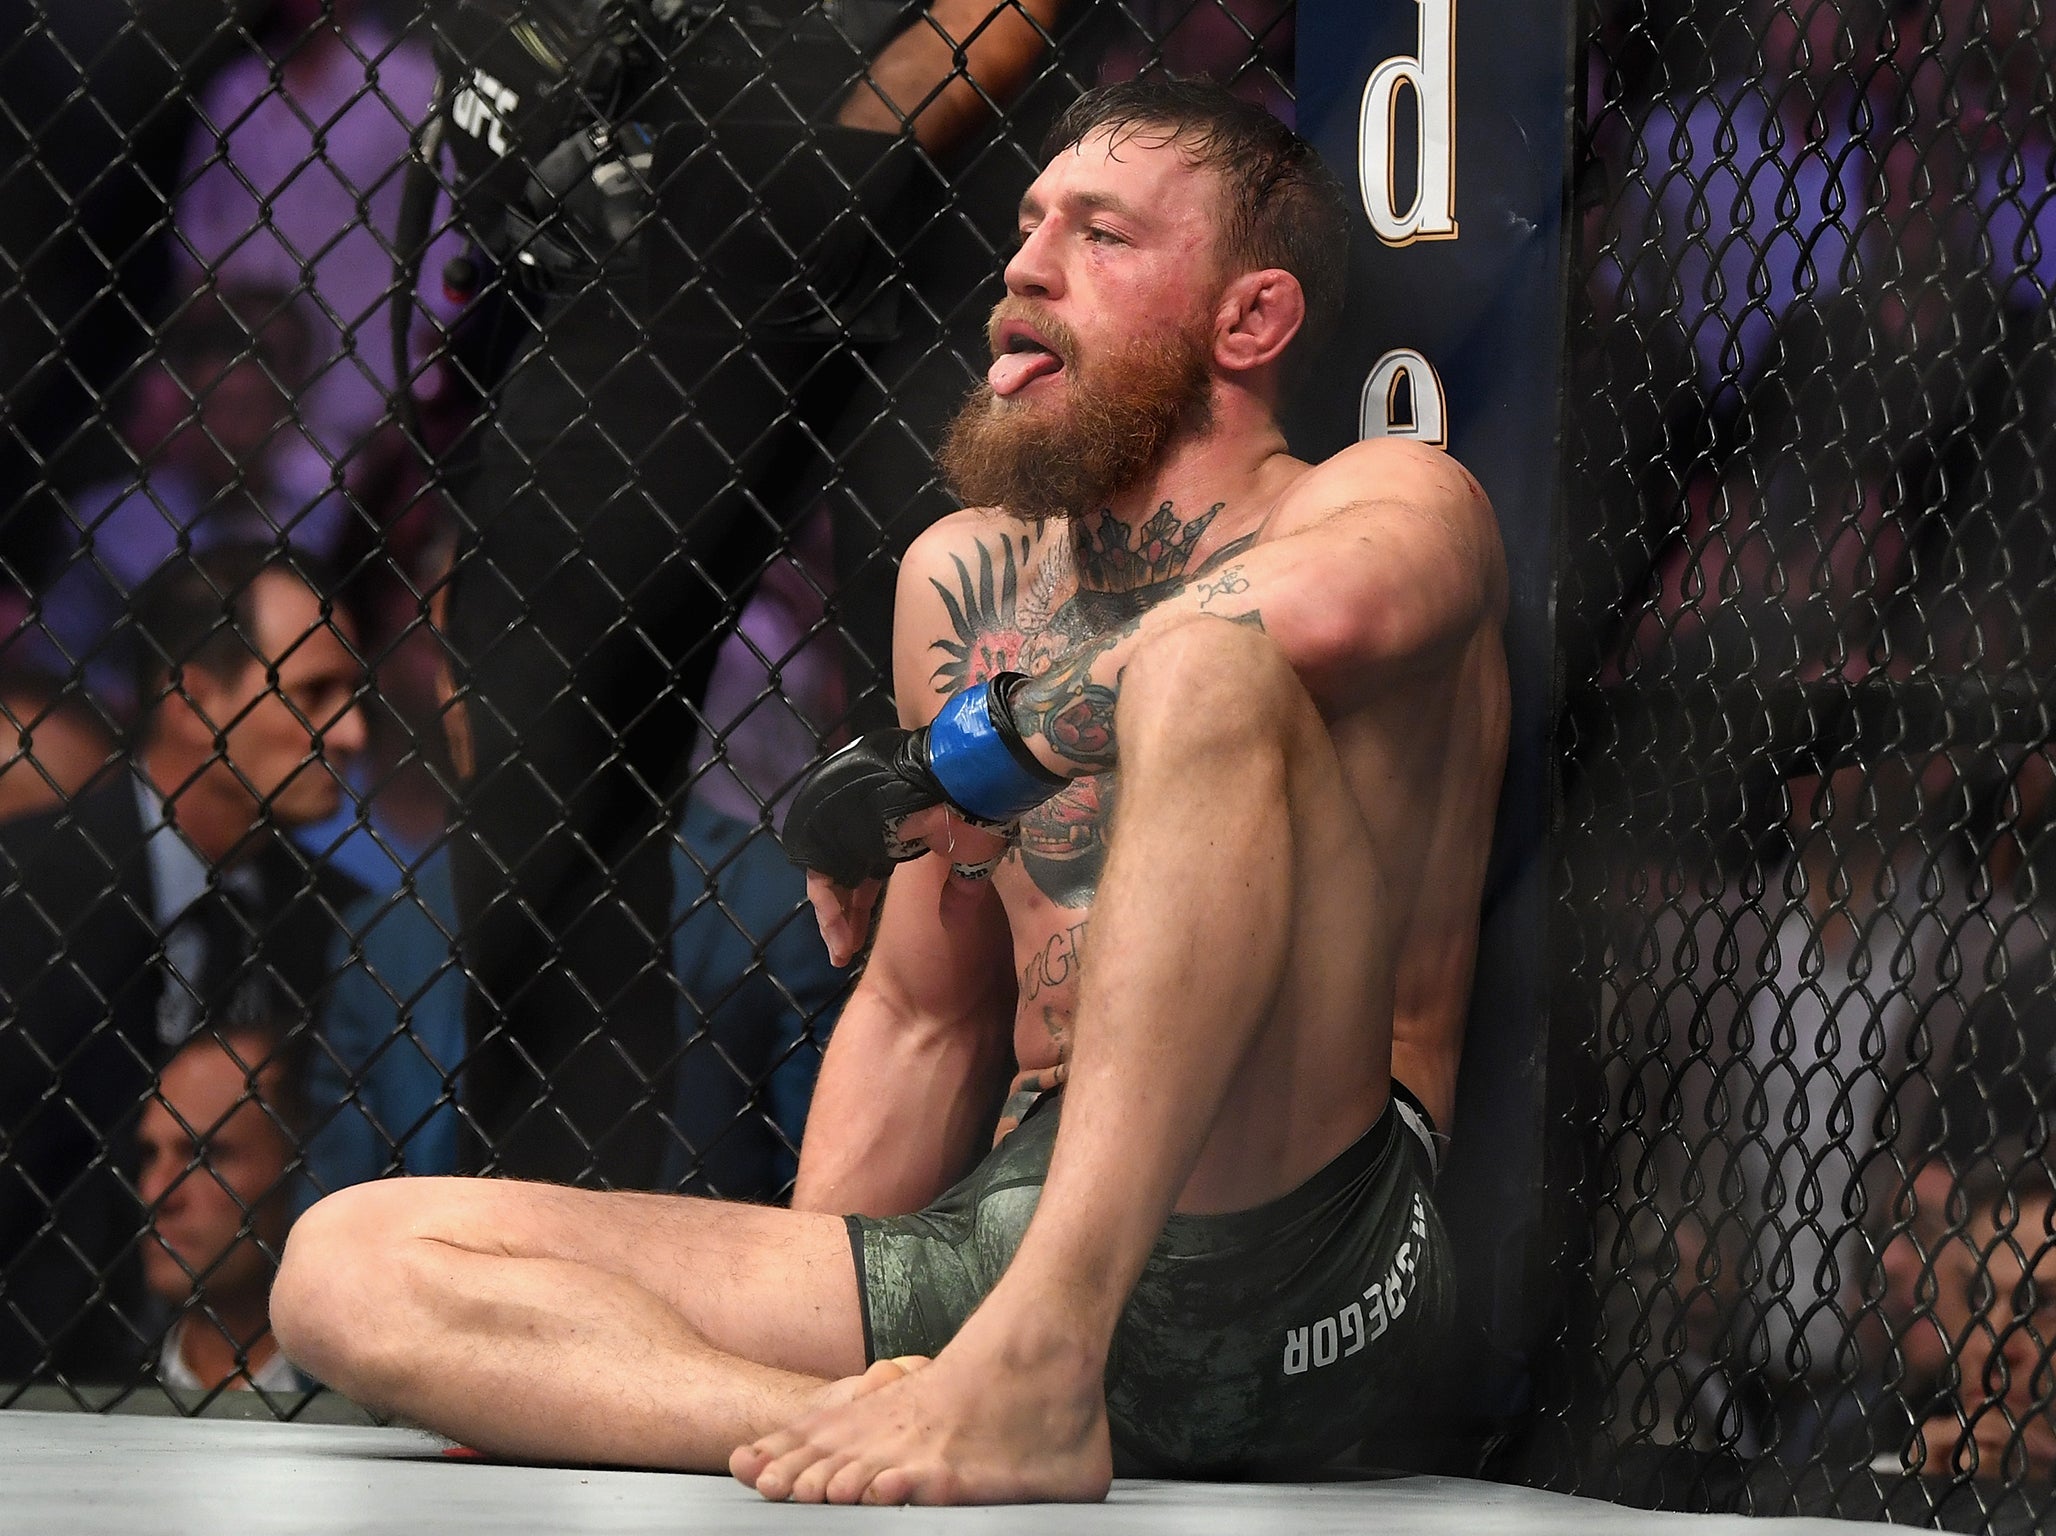 Conor McGregor said the second round against Khabib was the 'worst of my career'